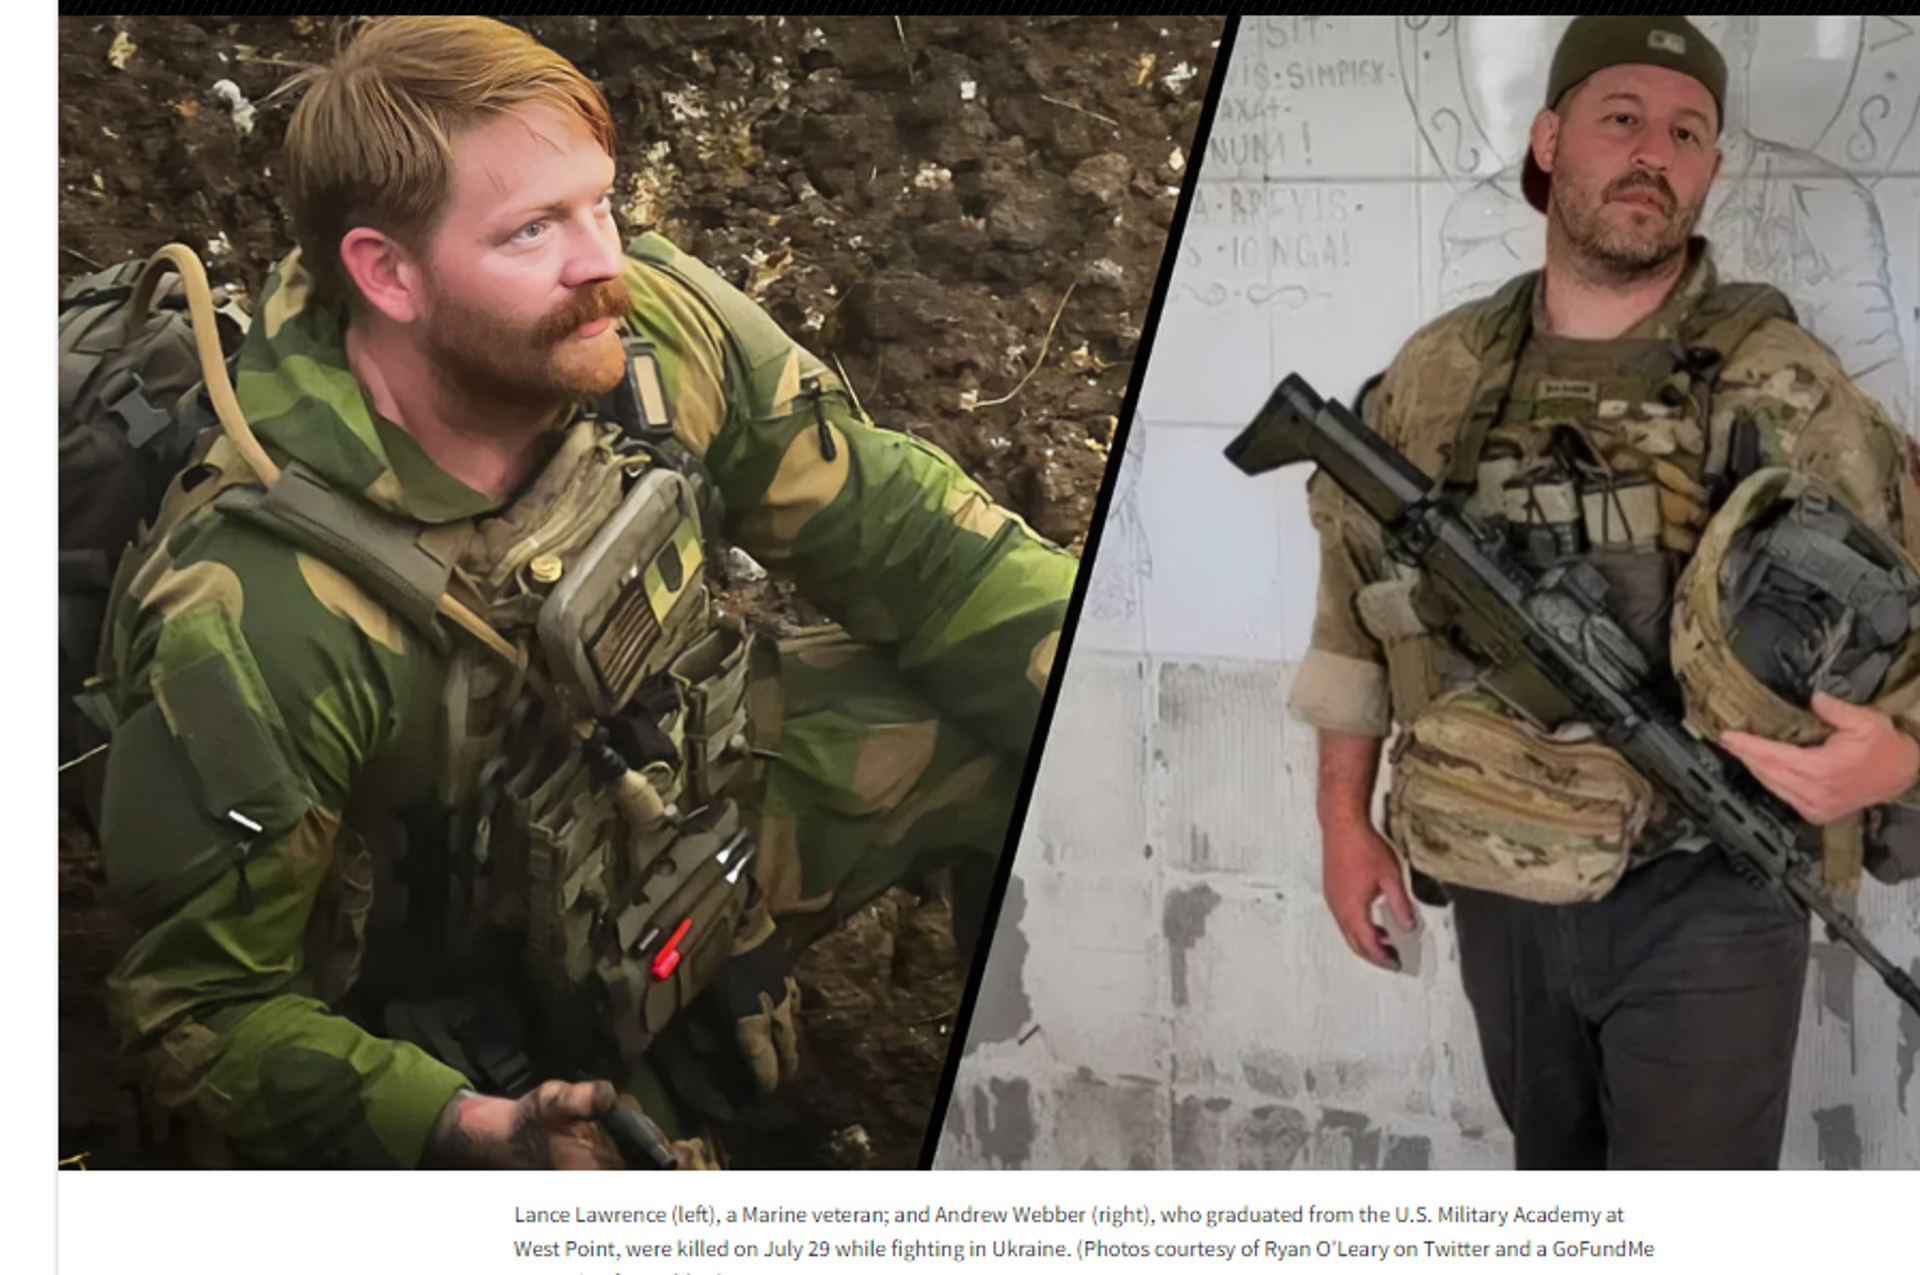 Screengrab showing Lance Lawrence (left), a US Marine veteran; and Andrew Webber (right), who were killed on July 29, 2023, while fighting in Ukraine. (Photos courtesy of Ryan O’Leary on X, and a GoFundMe campaign for Webber). - Sputnik International, 1920, 08.08.2023